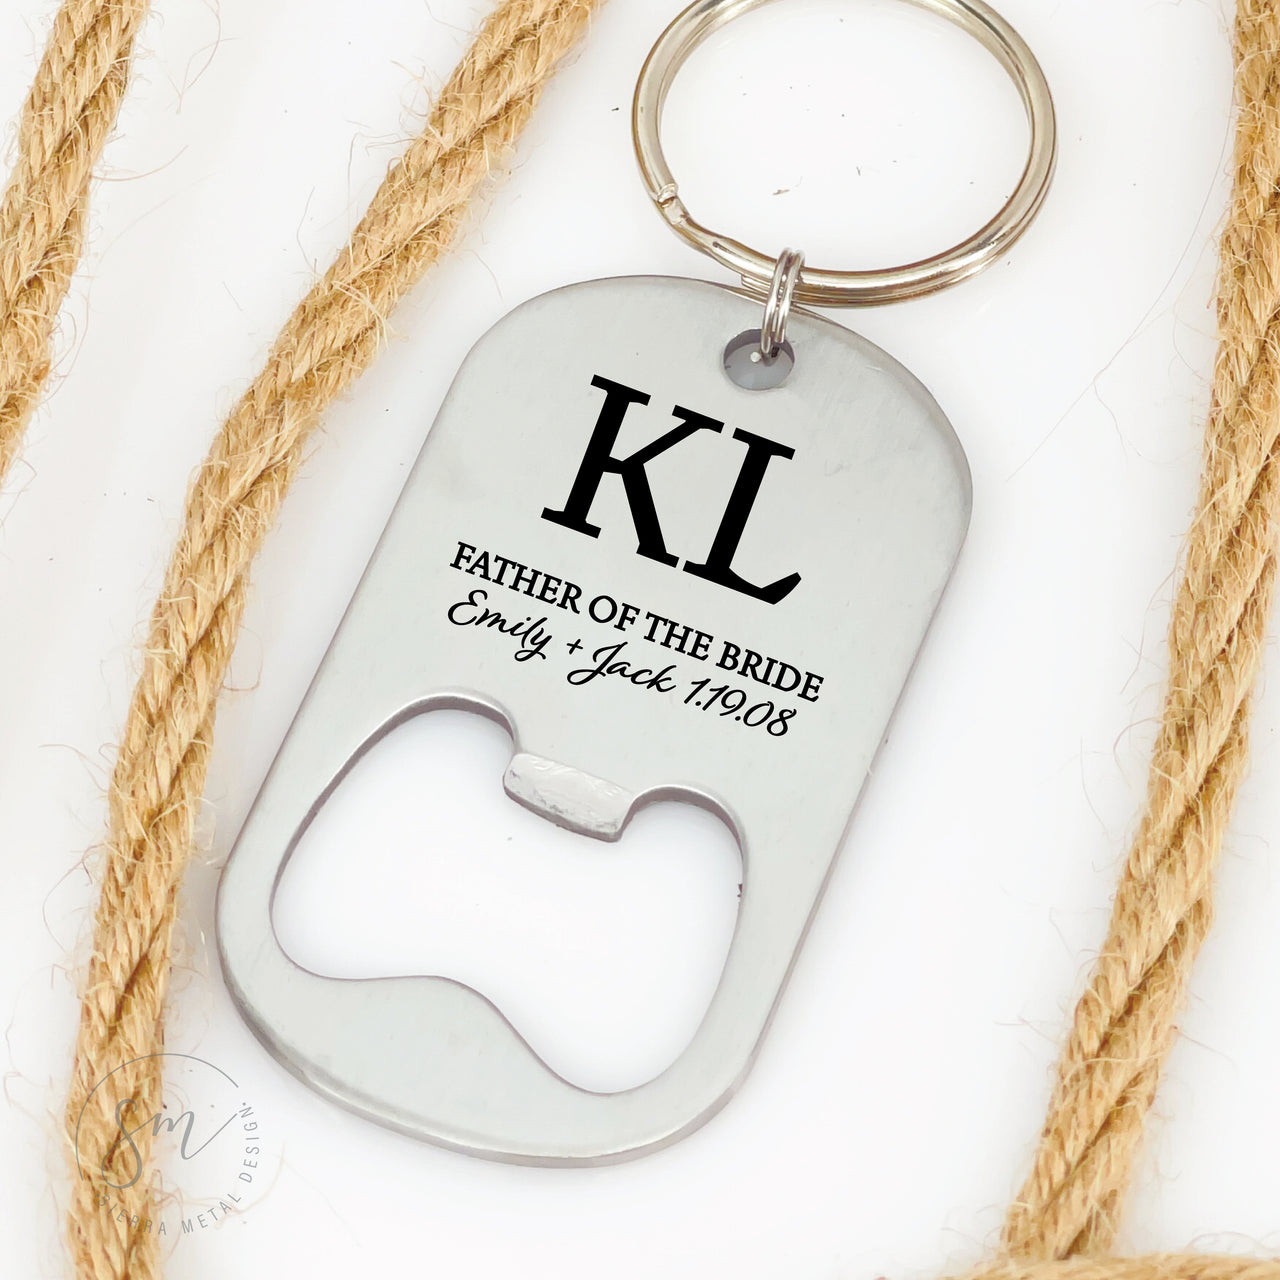 Father Of The Bride Bottle Opener Keychain